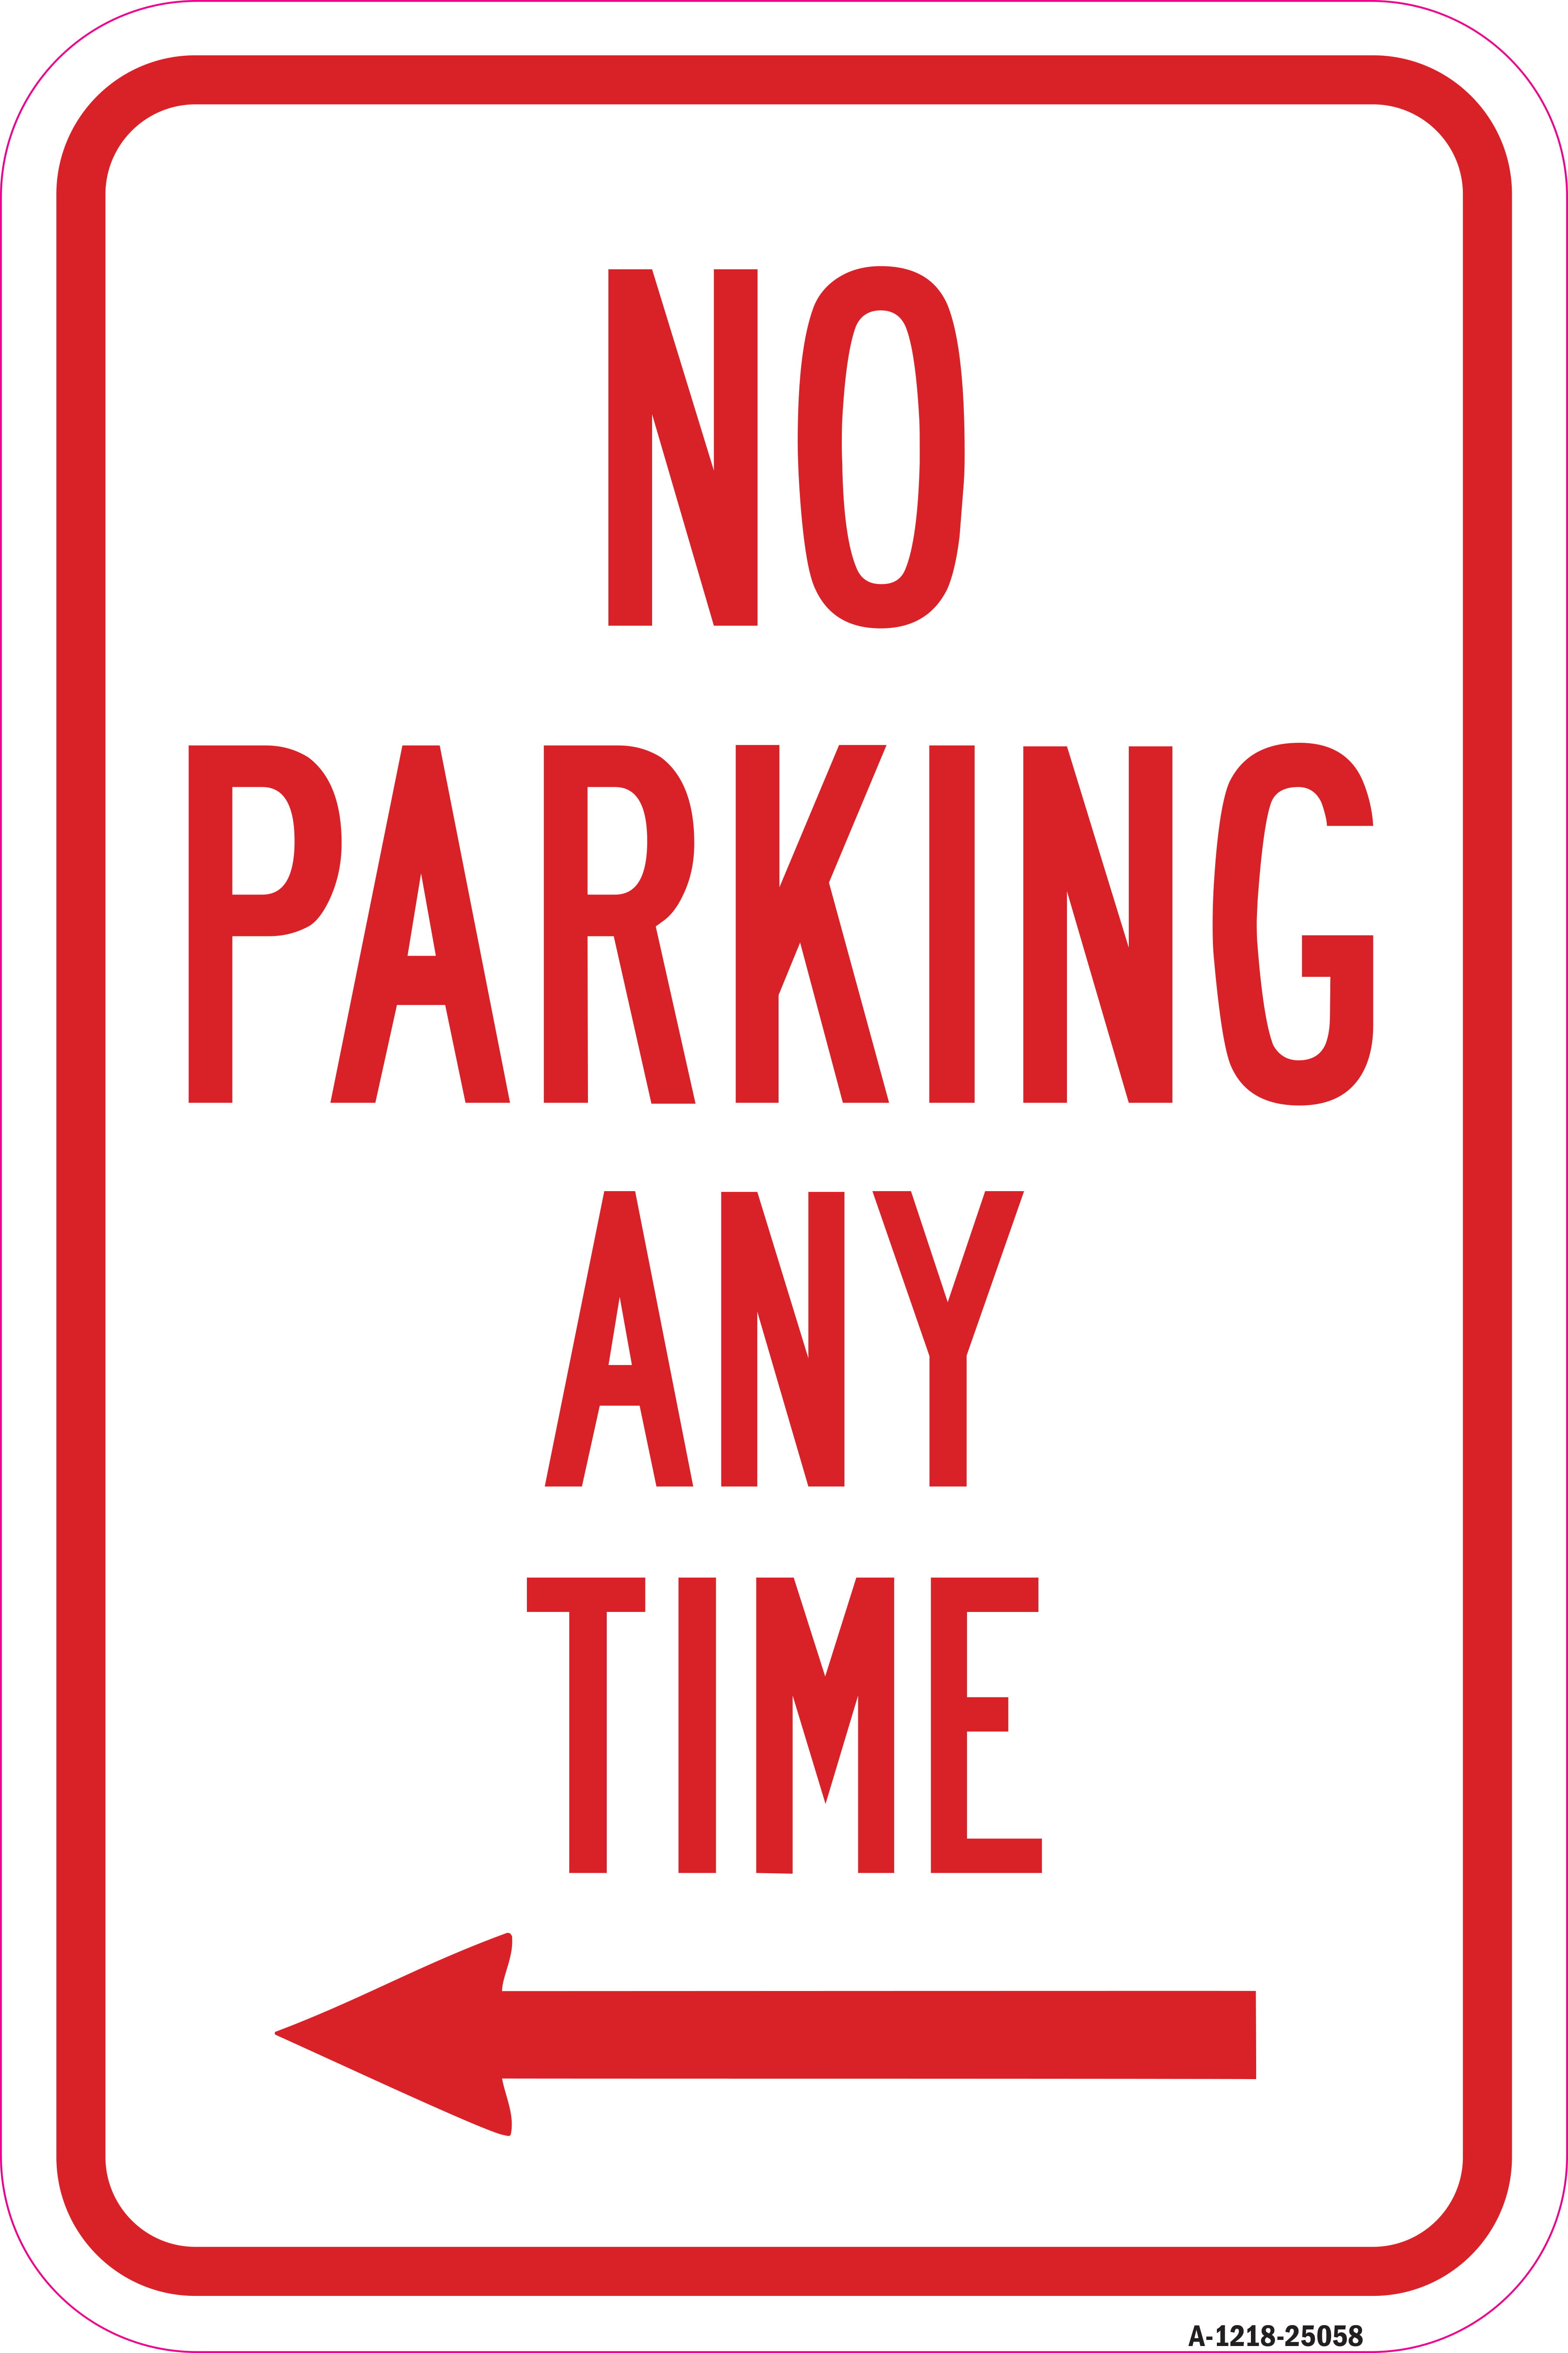 Made in The USA 12 X 18 Heavy-Gauge Aluminum Rust Proof Parking Sign No Right Turn Protect Your Business & Municipality 